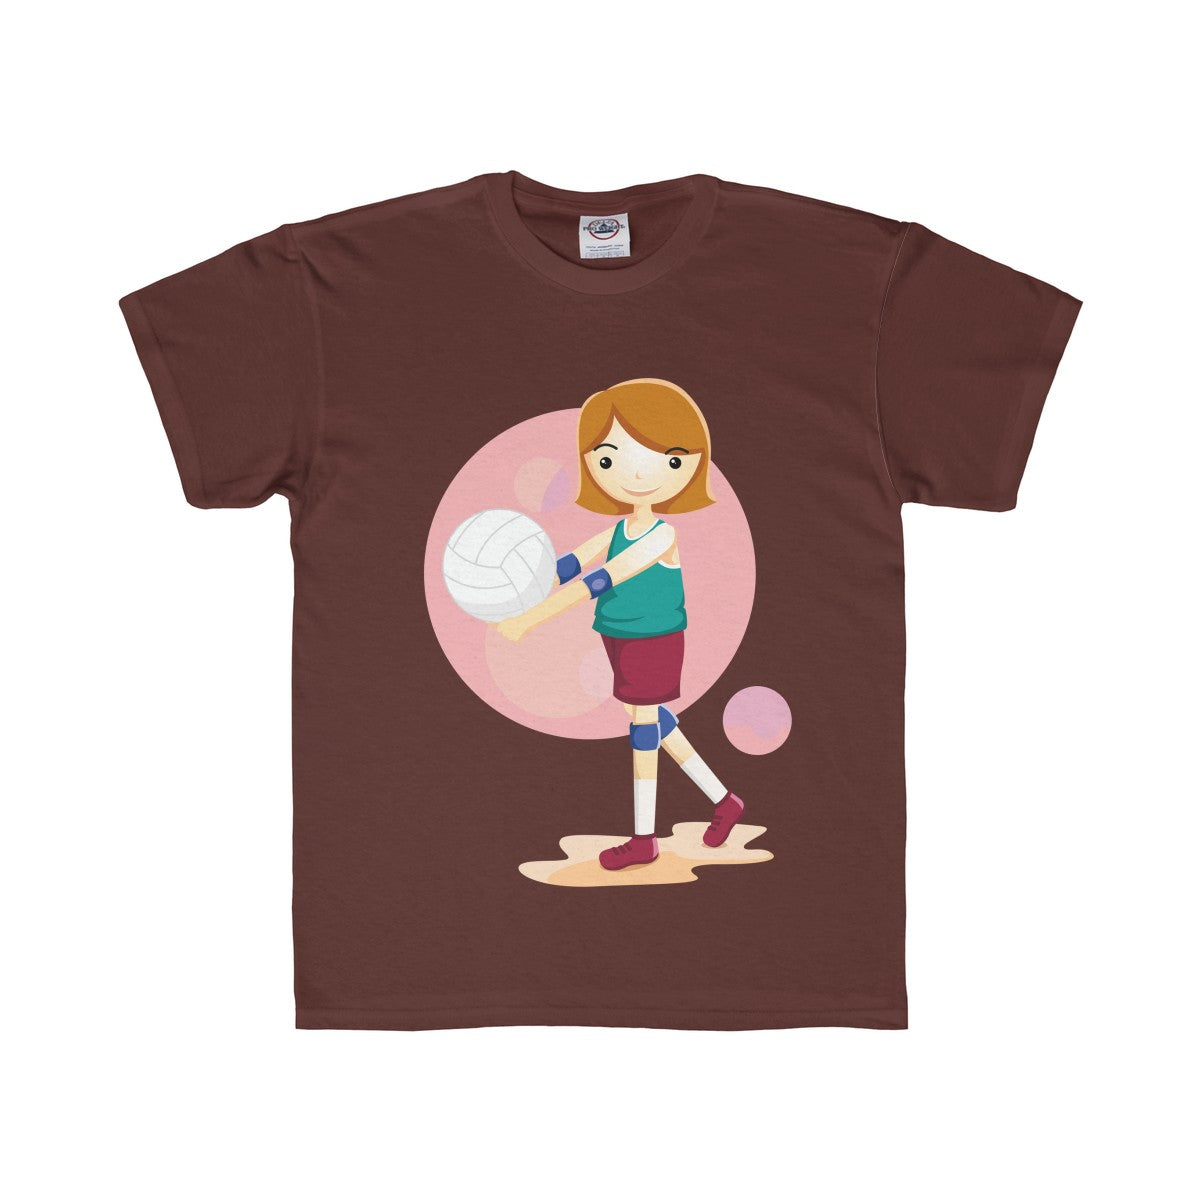 Girl Volleyball Player Youth Regular Fit Tee-Kids clothes-PureDesignTees